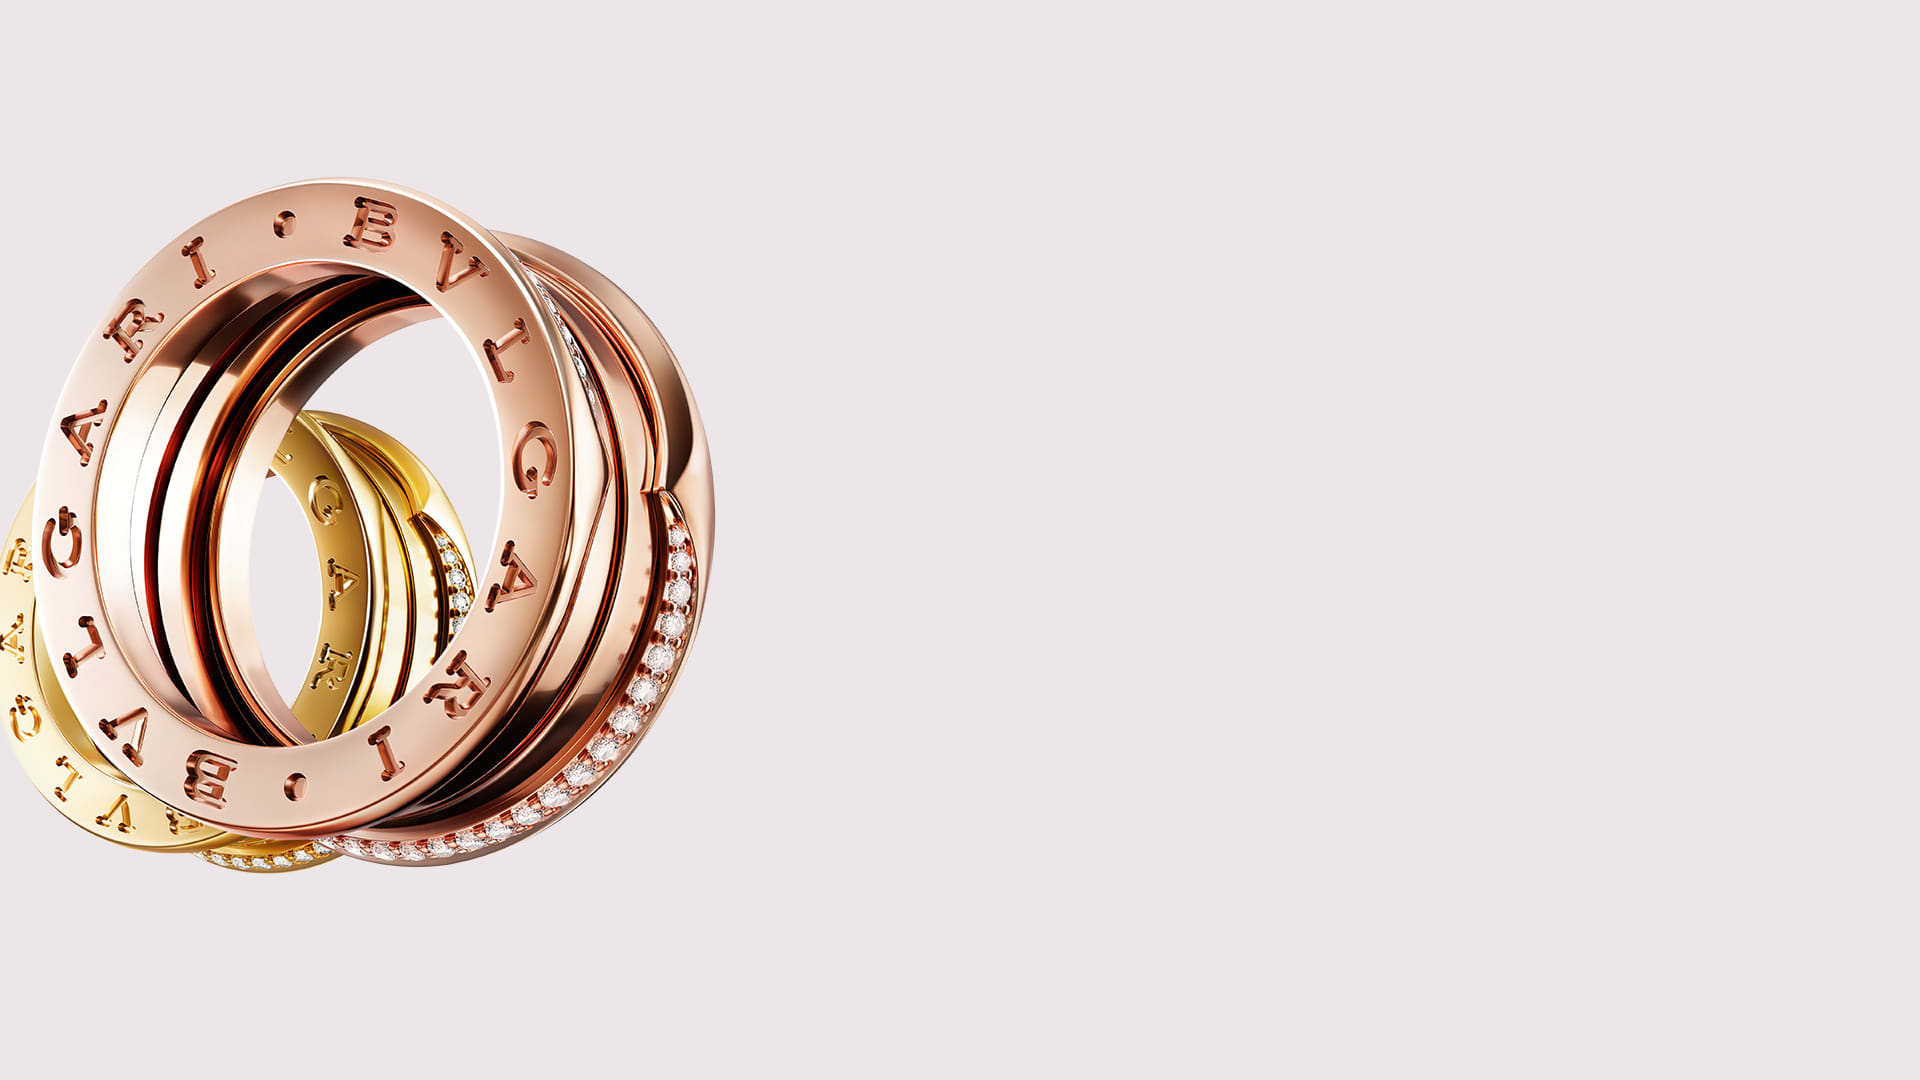 B.zero1 rings in 18 kt rose and yellow gold with demi pavé diamonds on the edges, close-up.